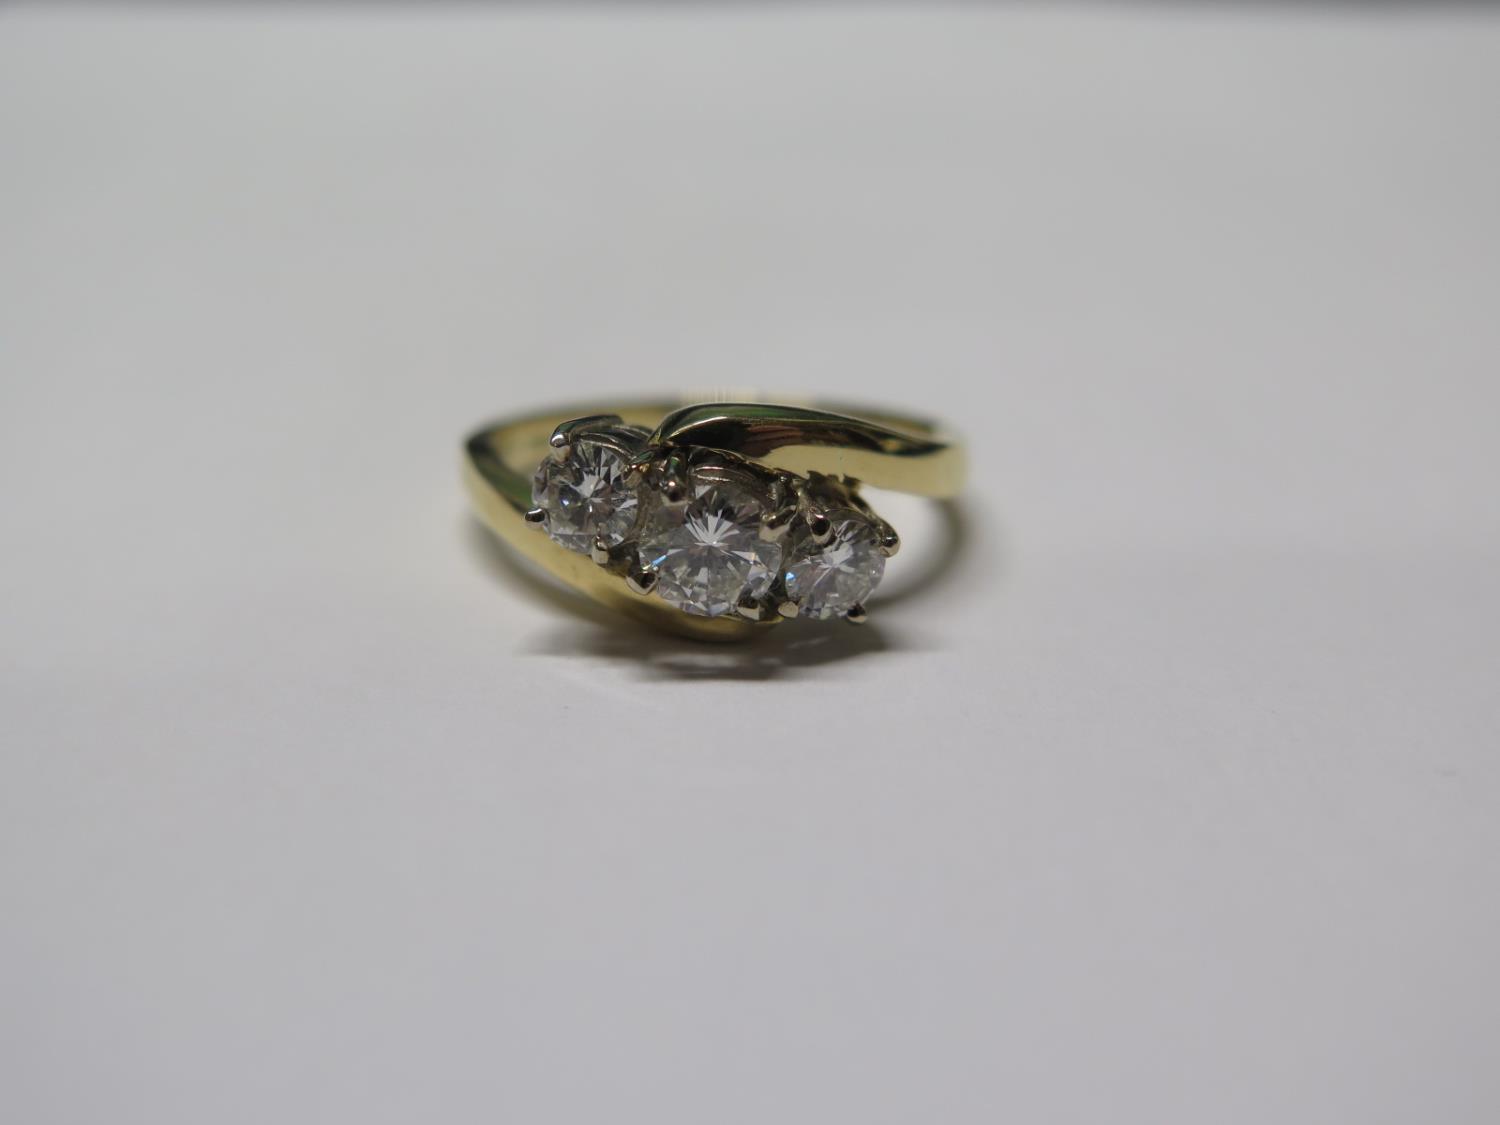 An 18ct yellow and white gold three stone crossover style ring - claw set with brilliant cut